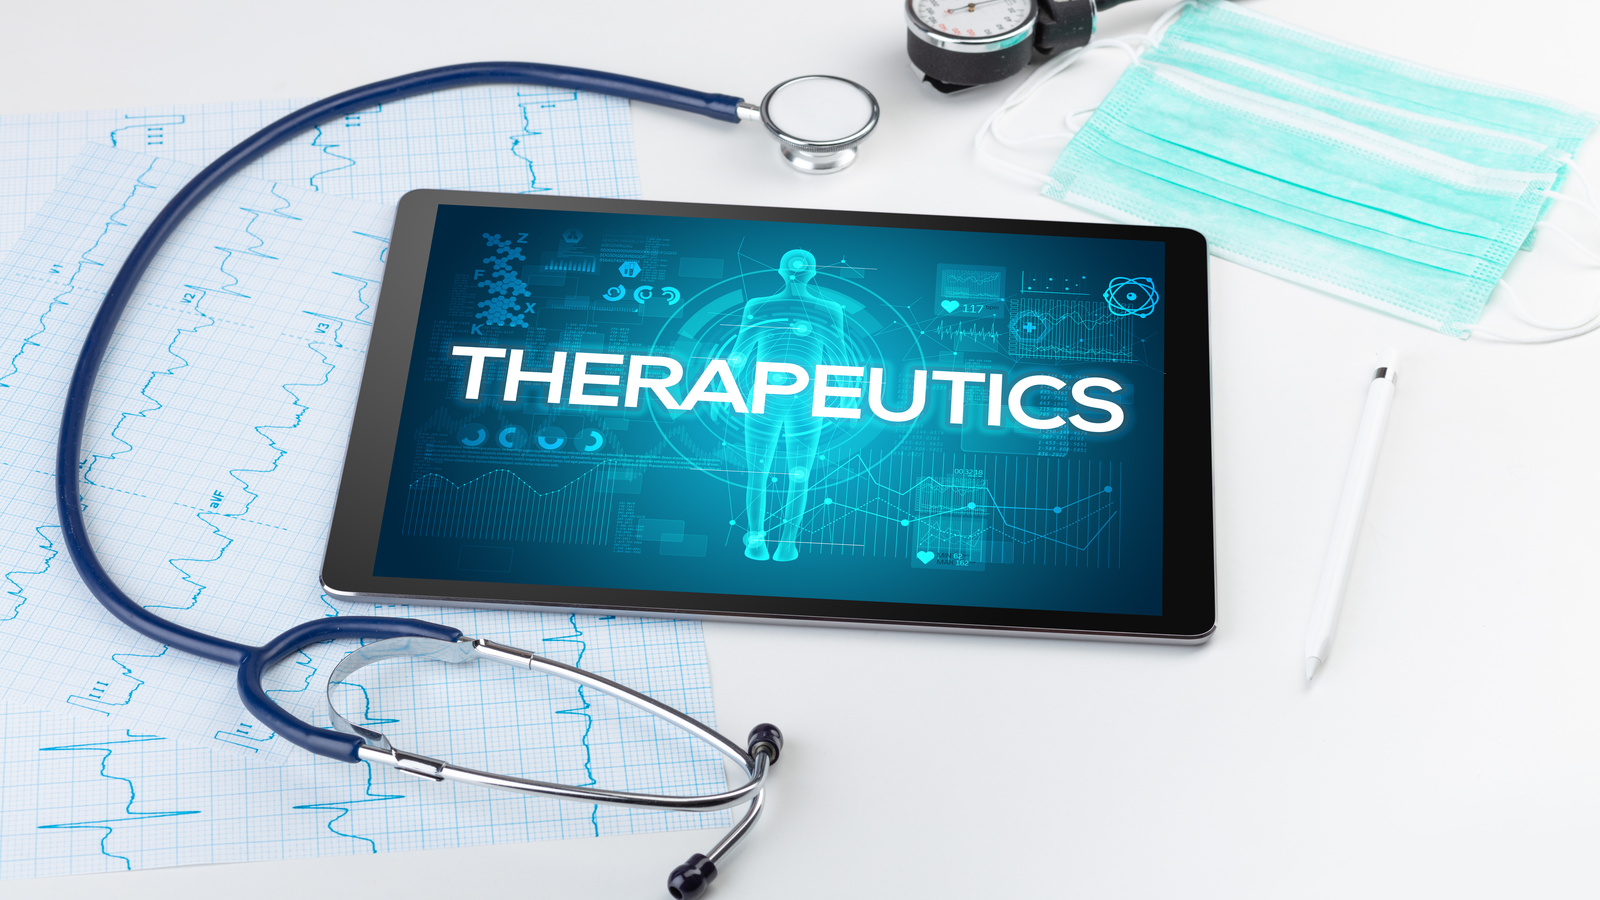 An image of a tablet with 'therapeutics' on the screen, a stethoscope and face mask around it